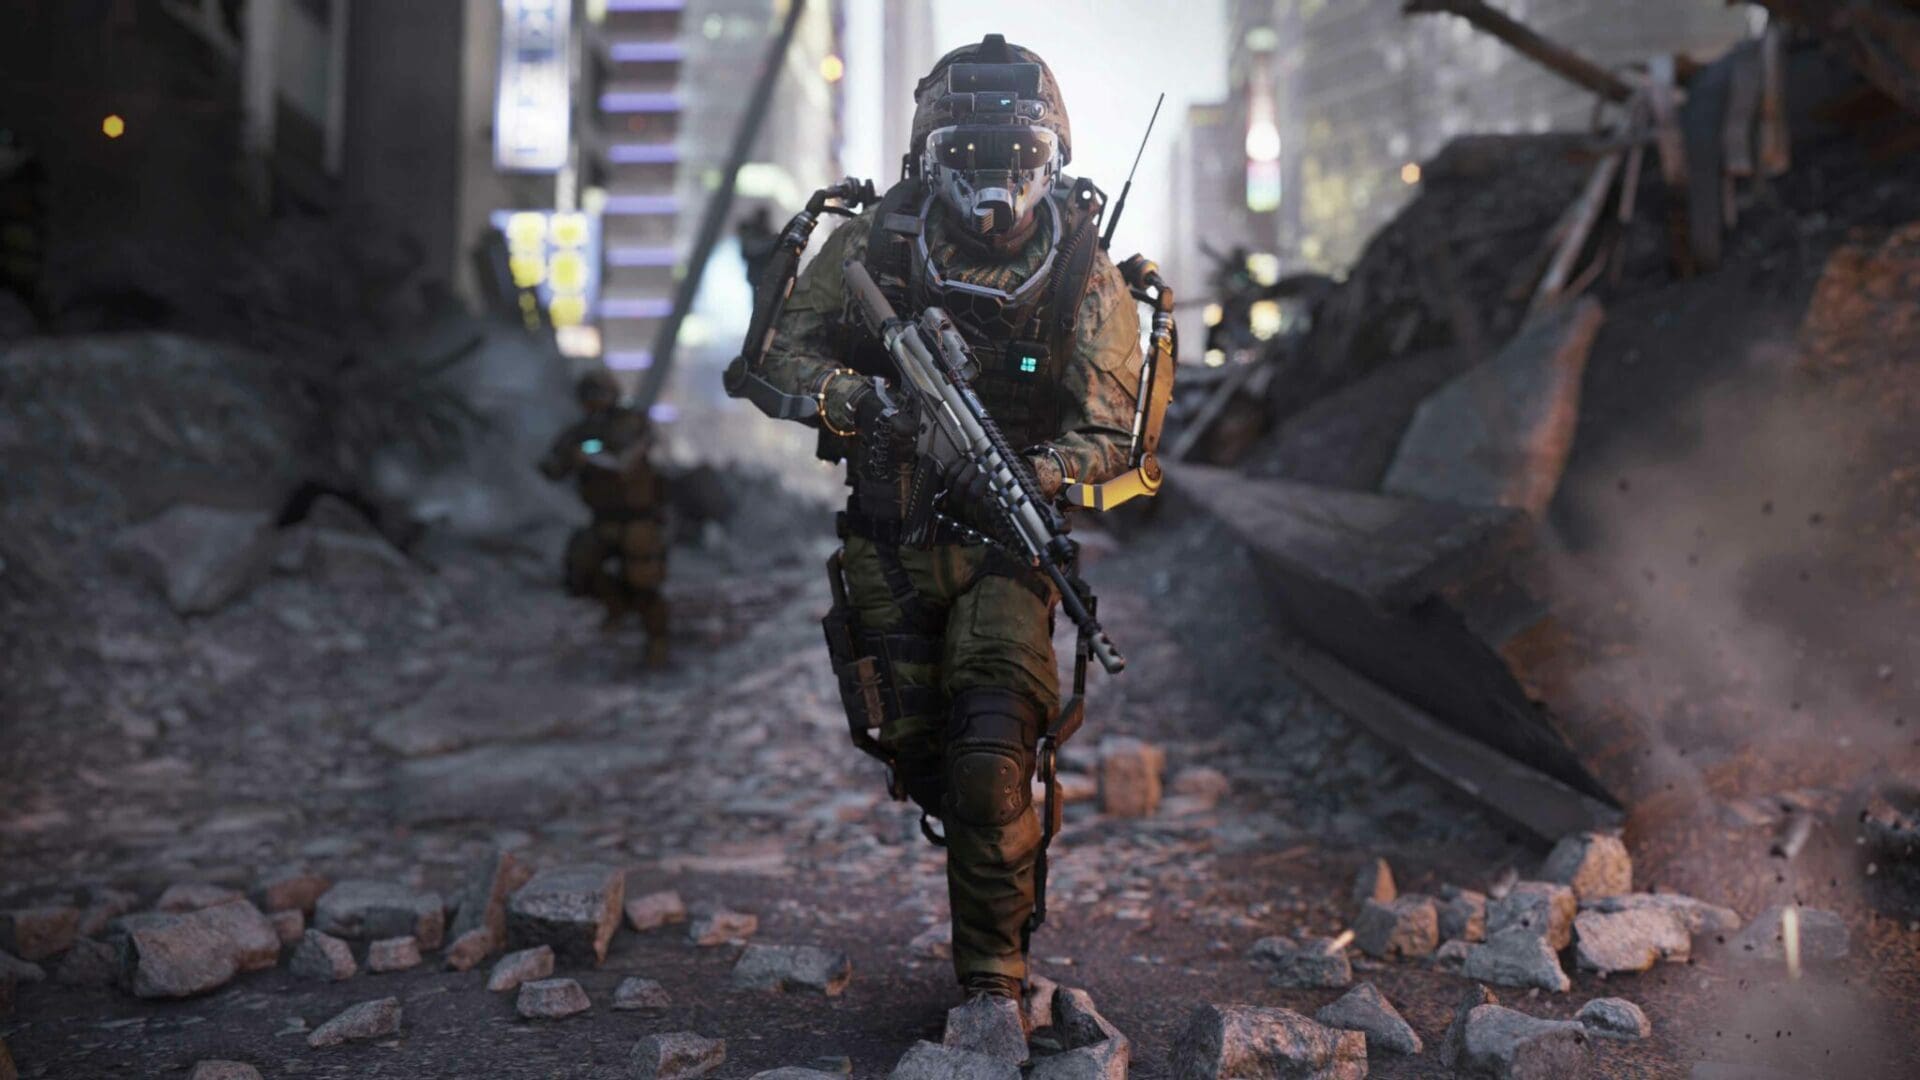 Call of Duty: Advanced Warfare Supremacy DLC Now Available On Xbox 360, Xbox One